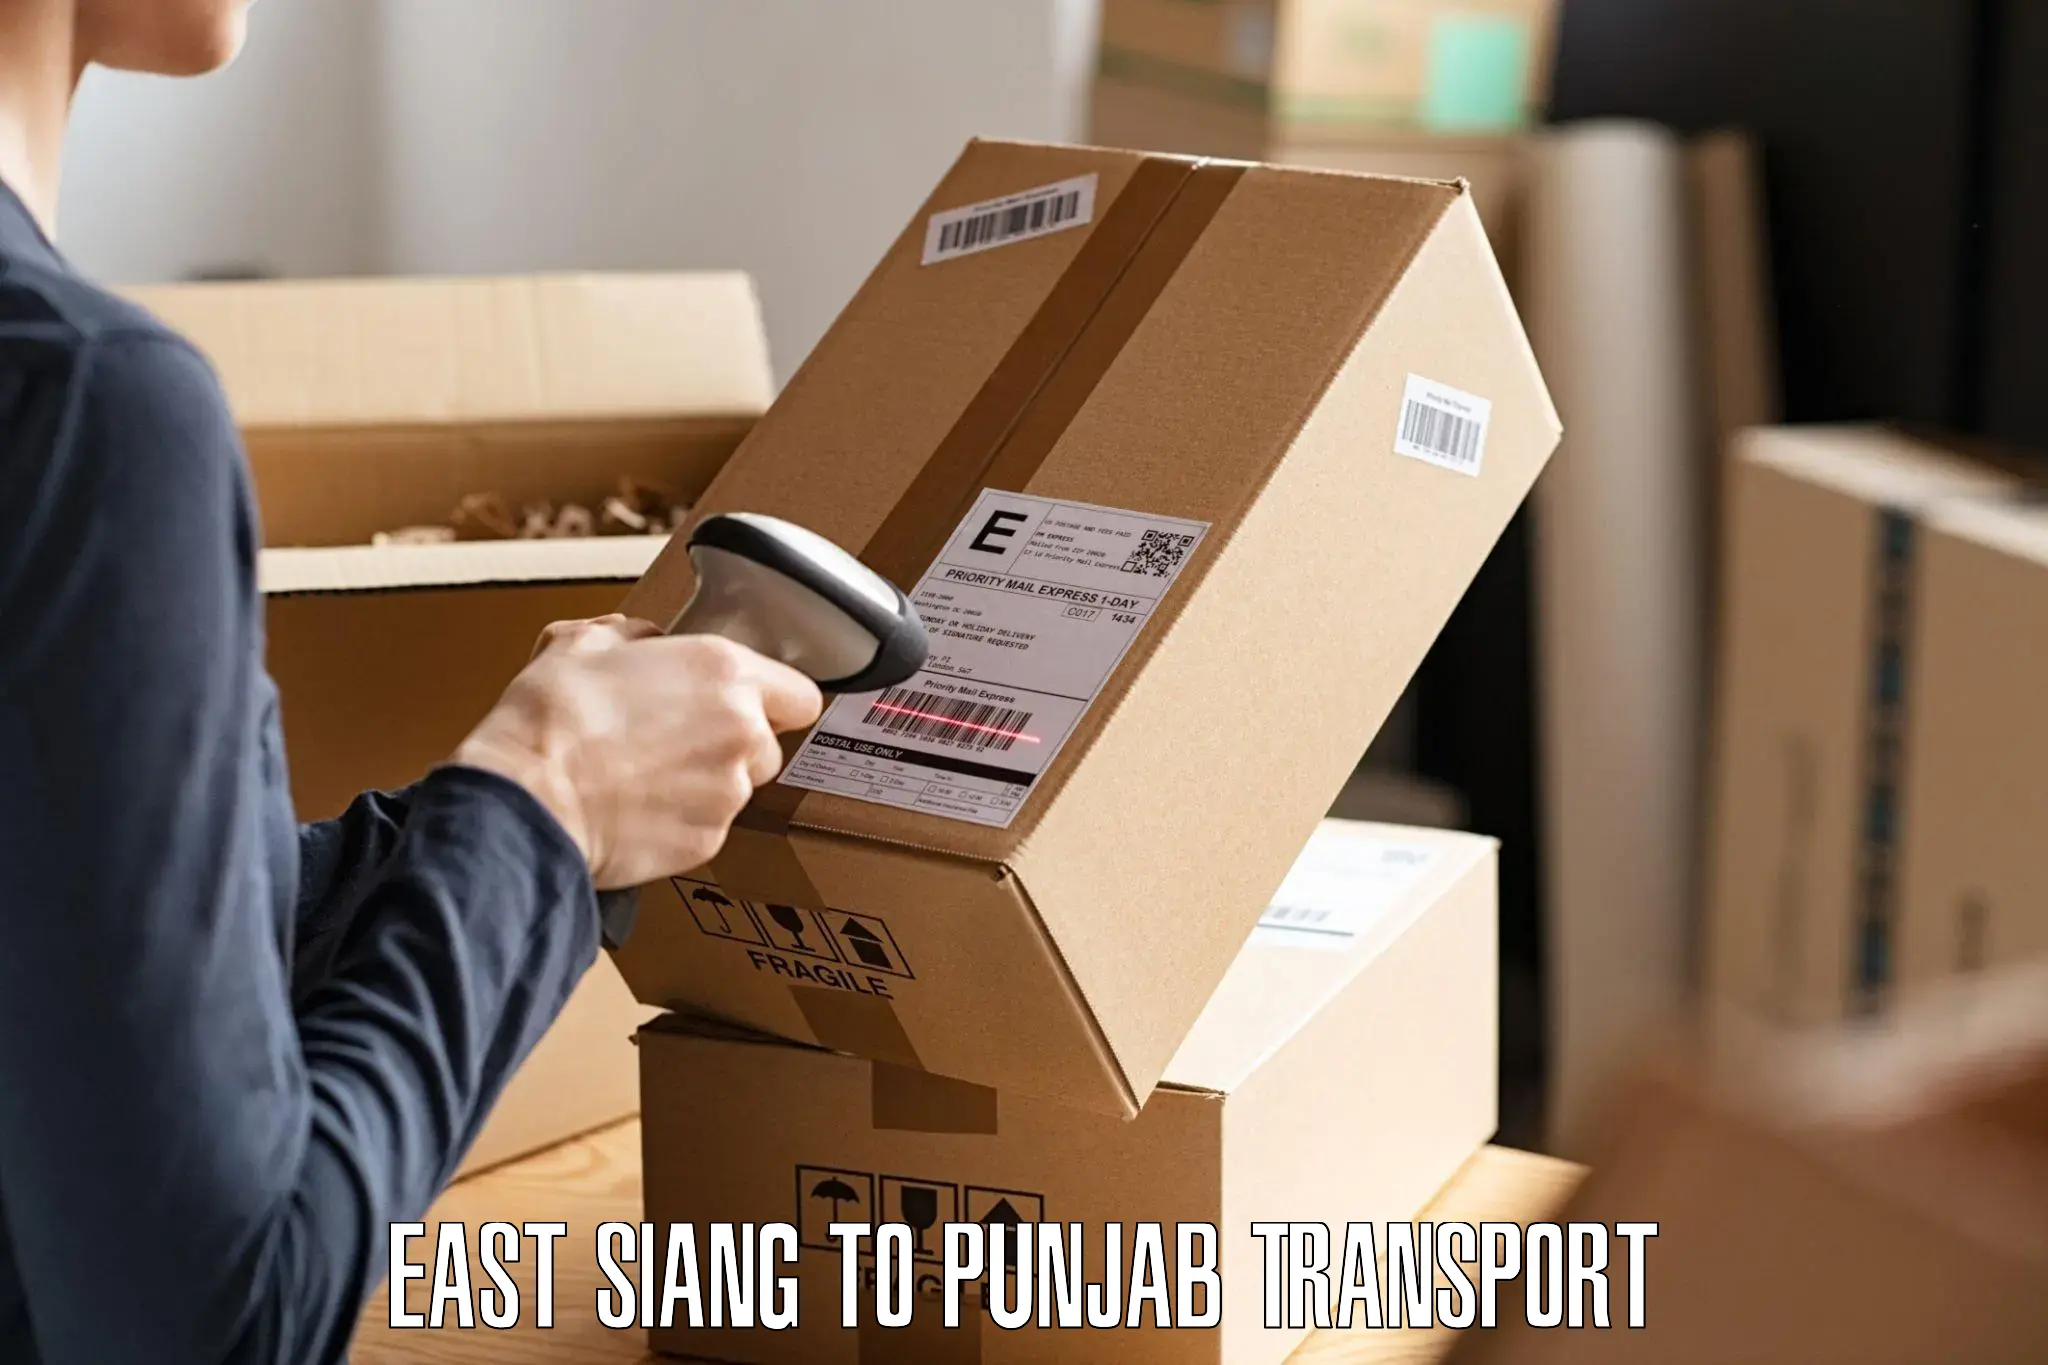 Online transport service in East Siang to Punjab